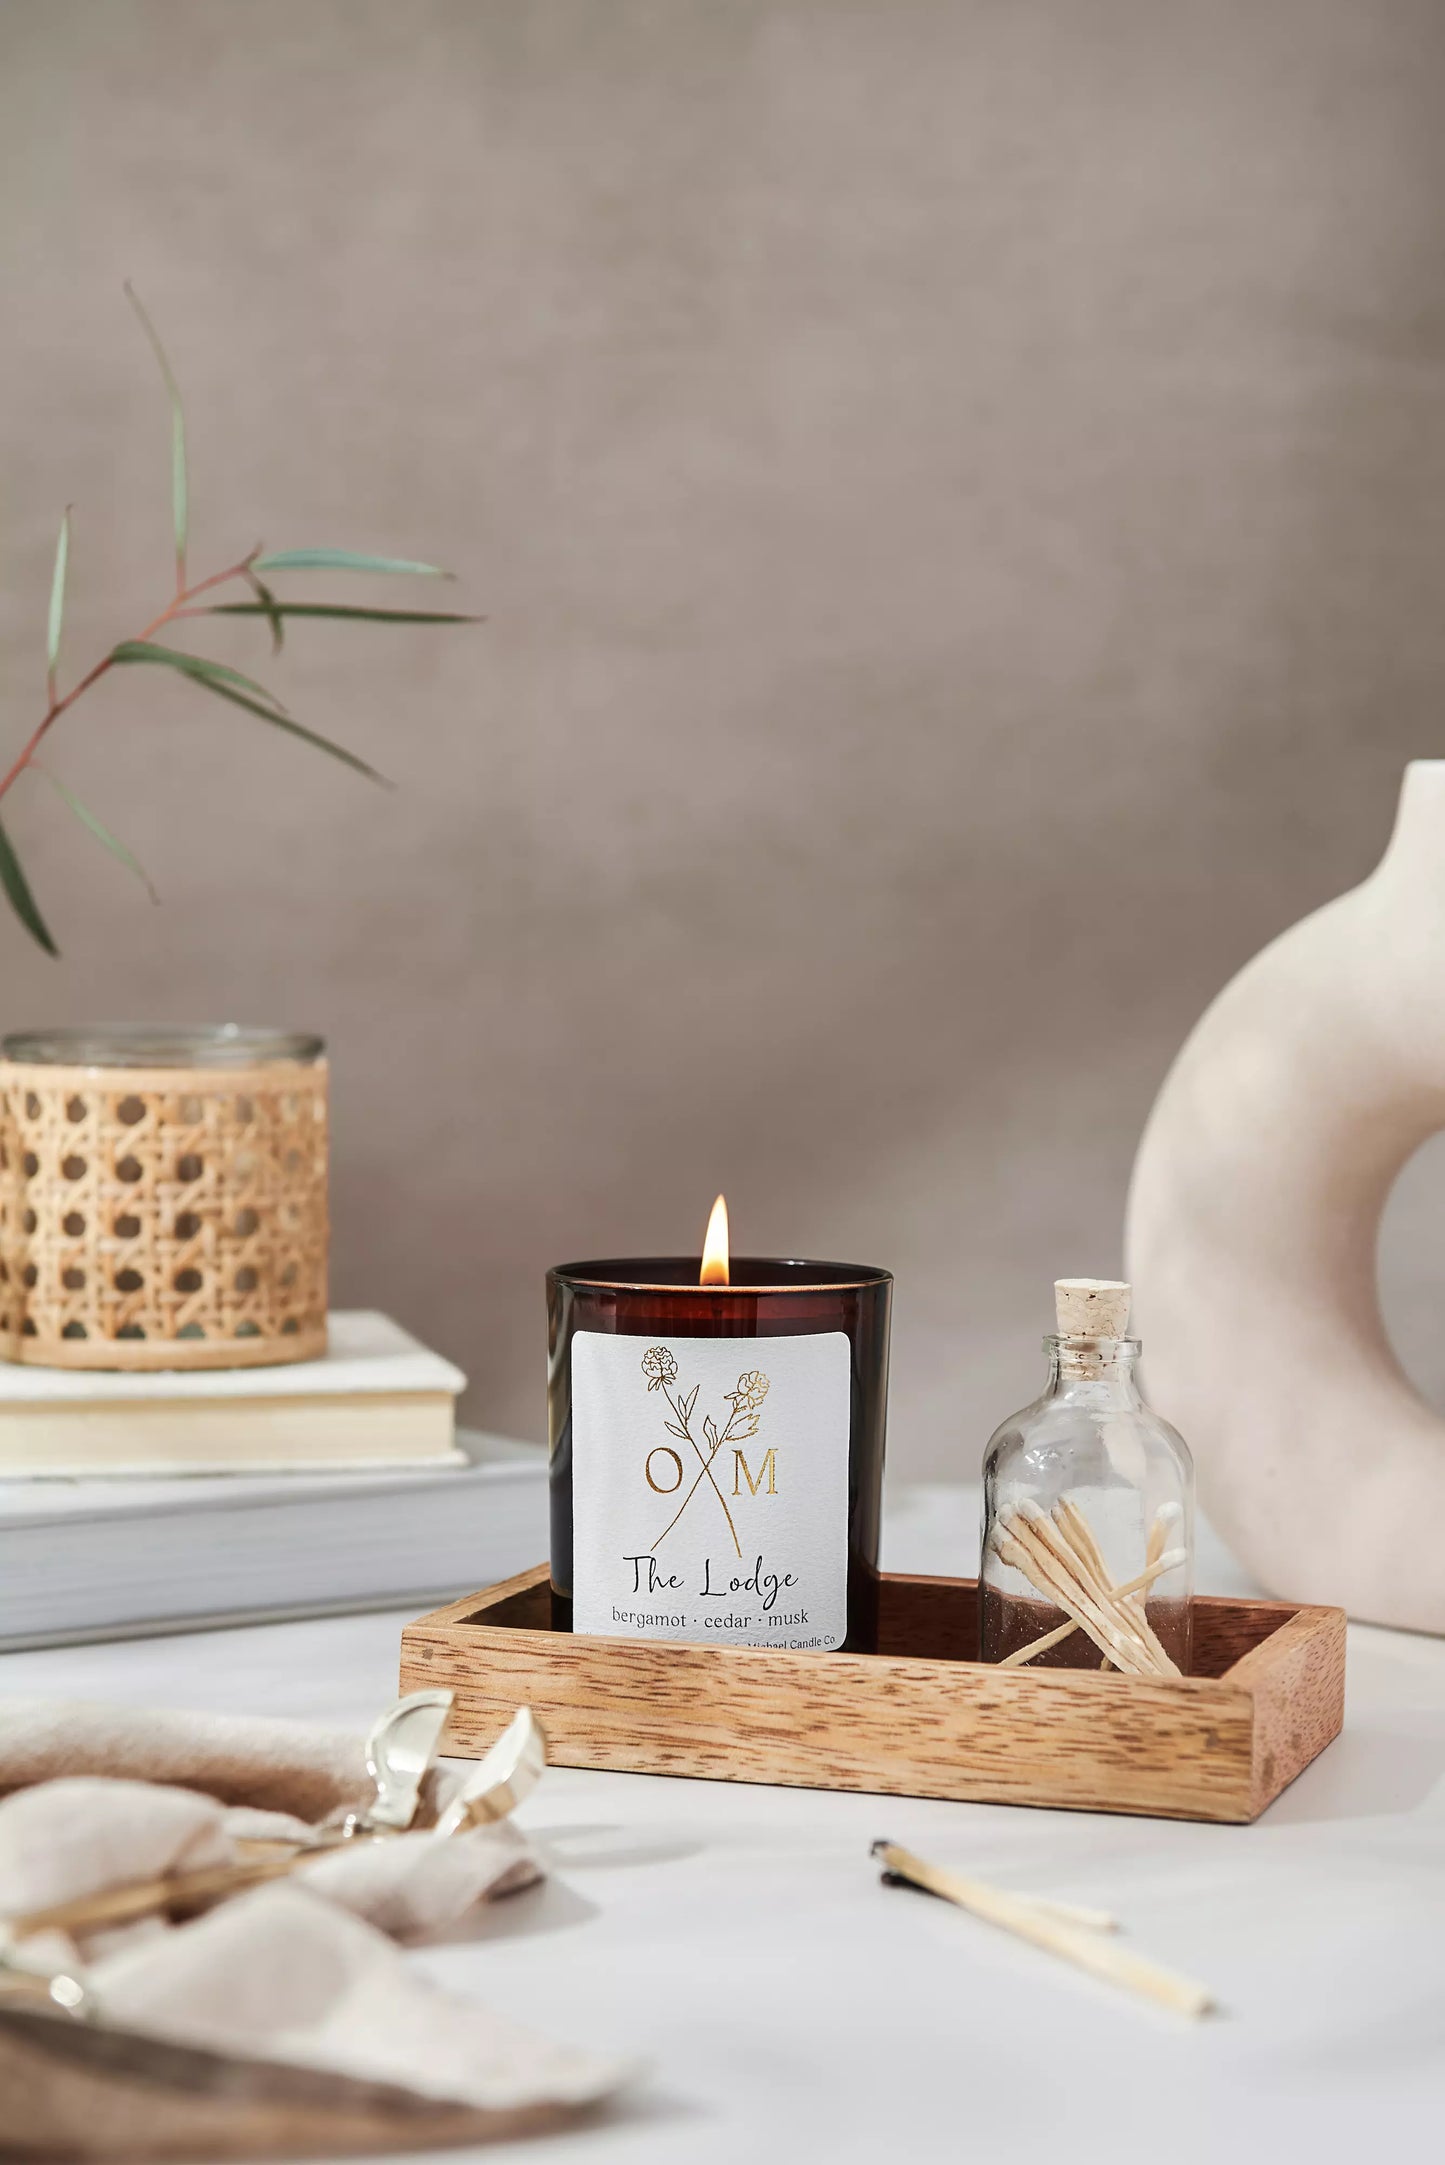 Our The Lodge scented candle is lit and on display in an amber glass jar.